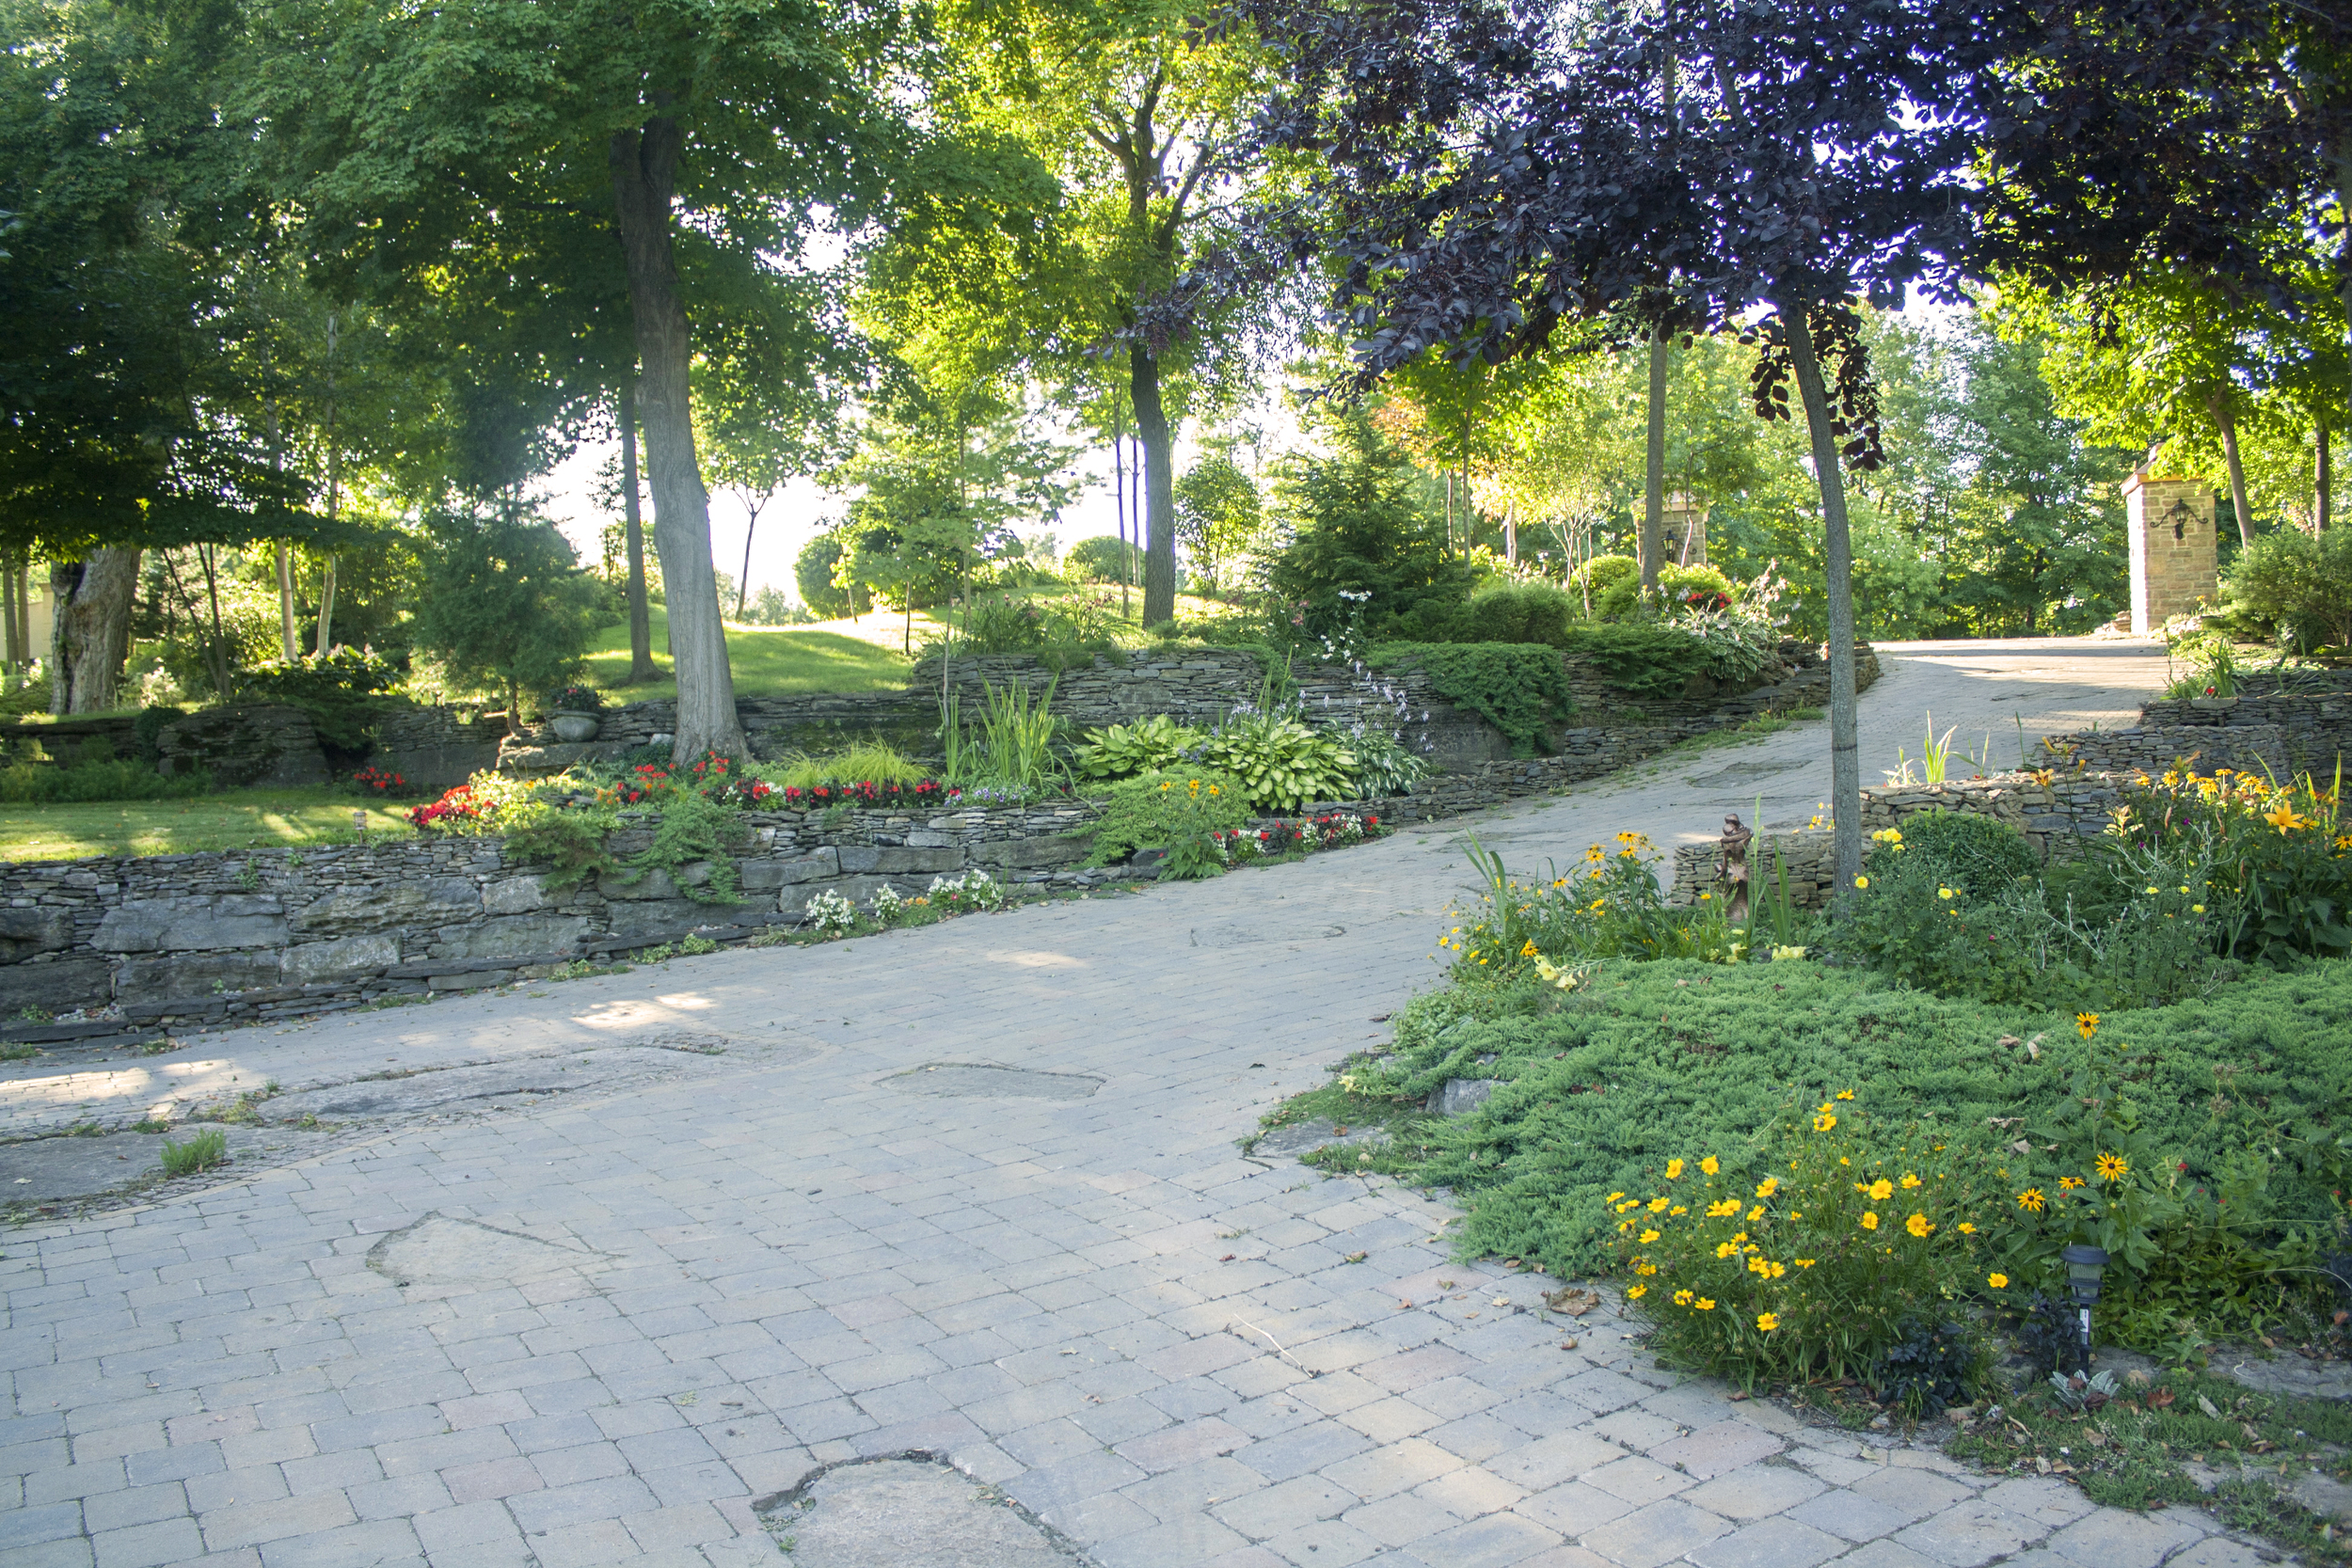 Landscape Design | Landscaping | Terrace Gardens | Driveway | Dry Lay Stone | Waterfront Dream Home | Riverview Design Solutions | Prescott, Ontario, Canada